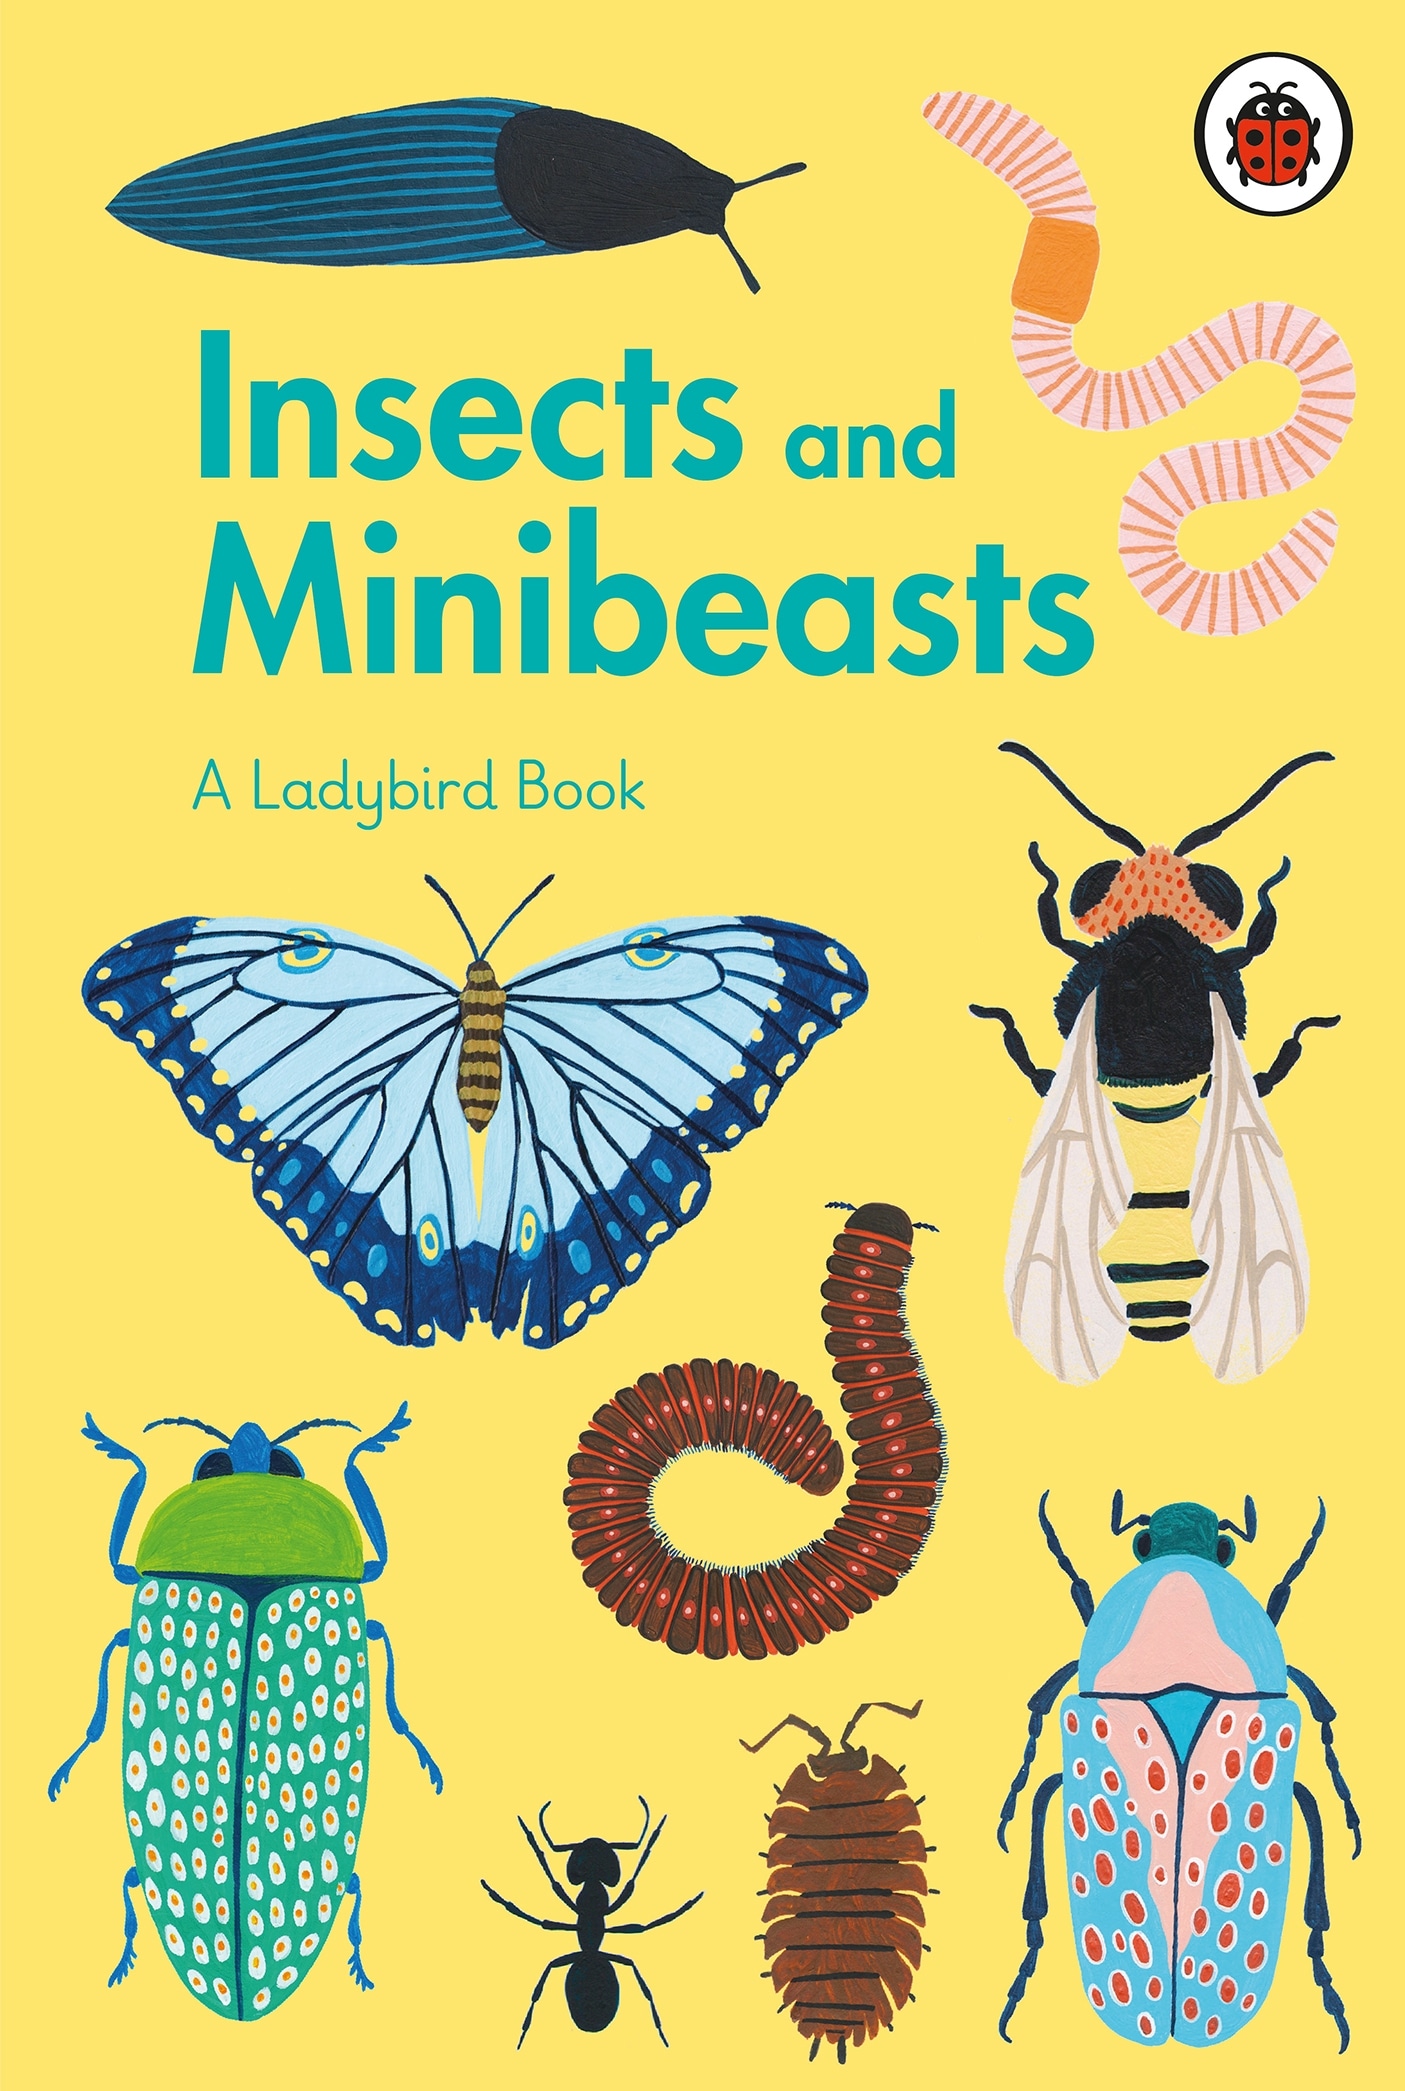 Book “A Ladybird Book: Insects and Minibeasts” by Amber Davenport — May 6, 2021